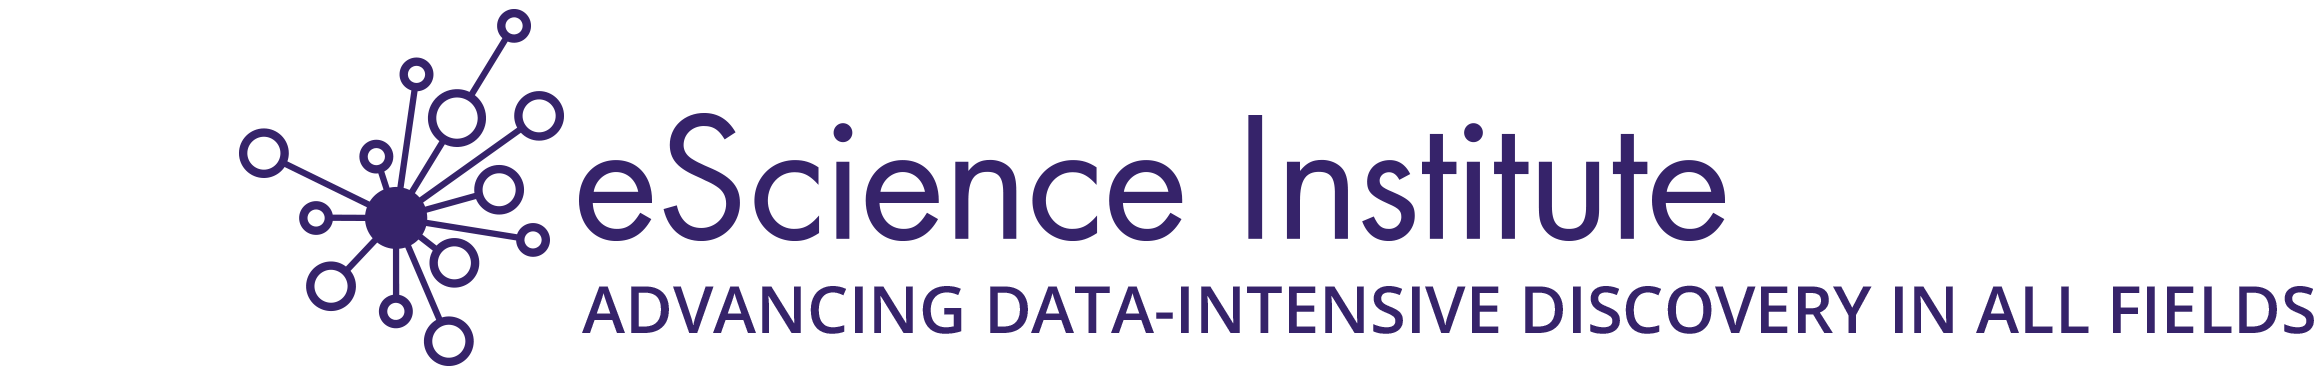 logo of the eScience Institute, with subheading 'Advancing Data-intensive discovery in all fields'